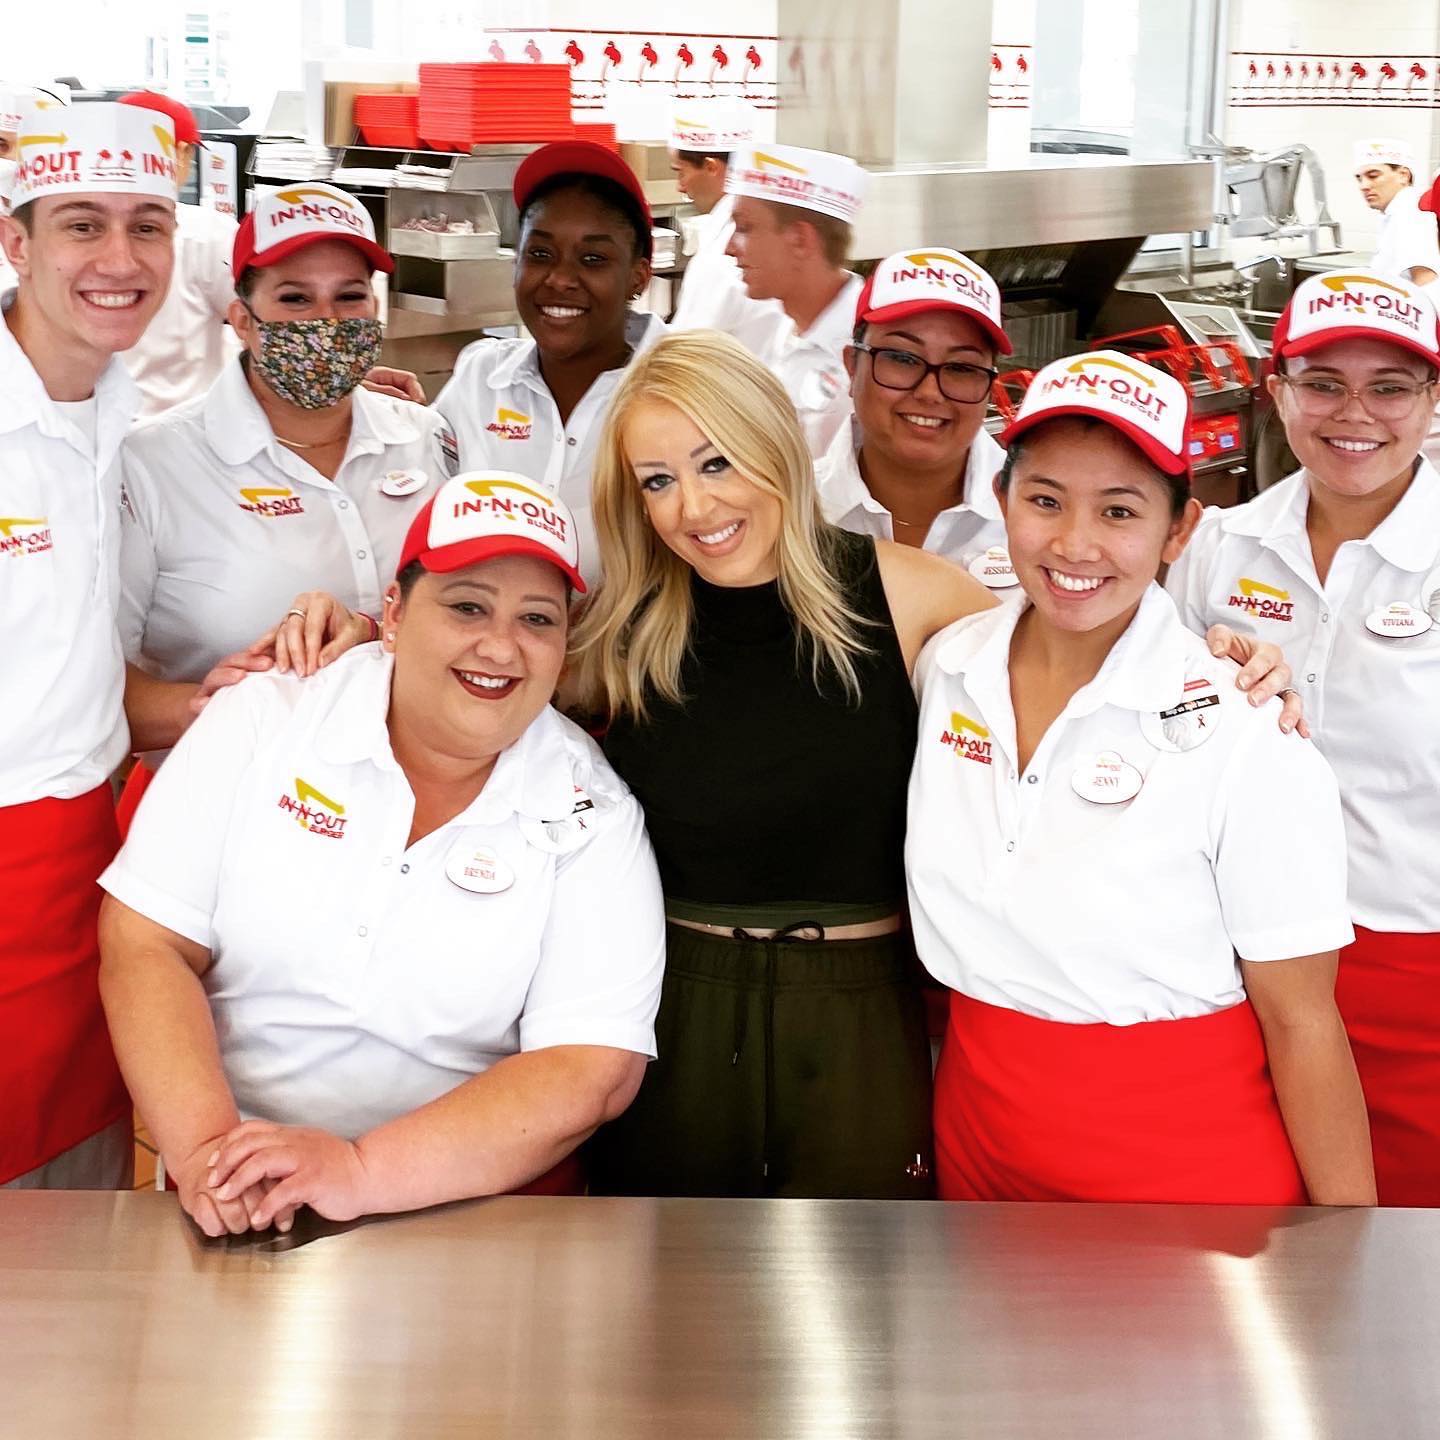 Lynsi Snyder with the In-N-Out Burger crew of Brea branch in California